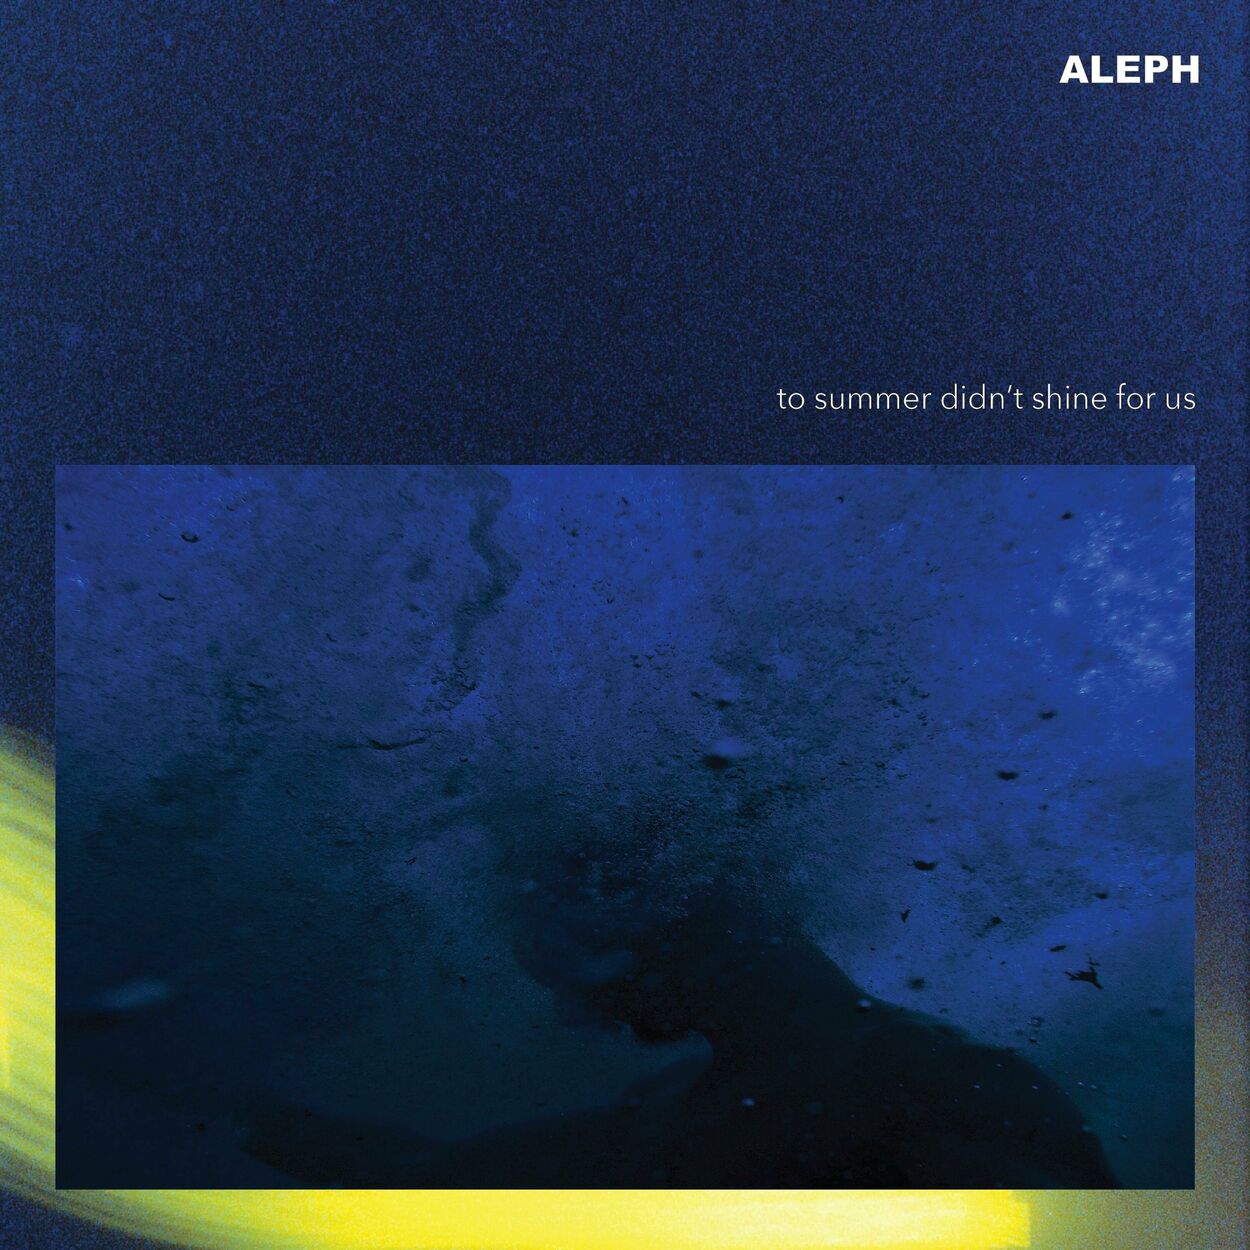 Aleph – To summer didn’t shine for us – Single